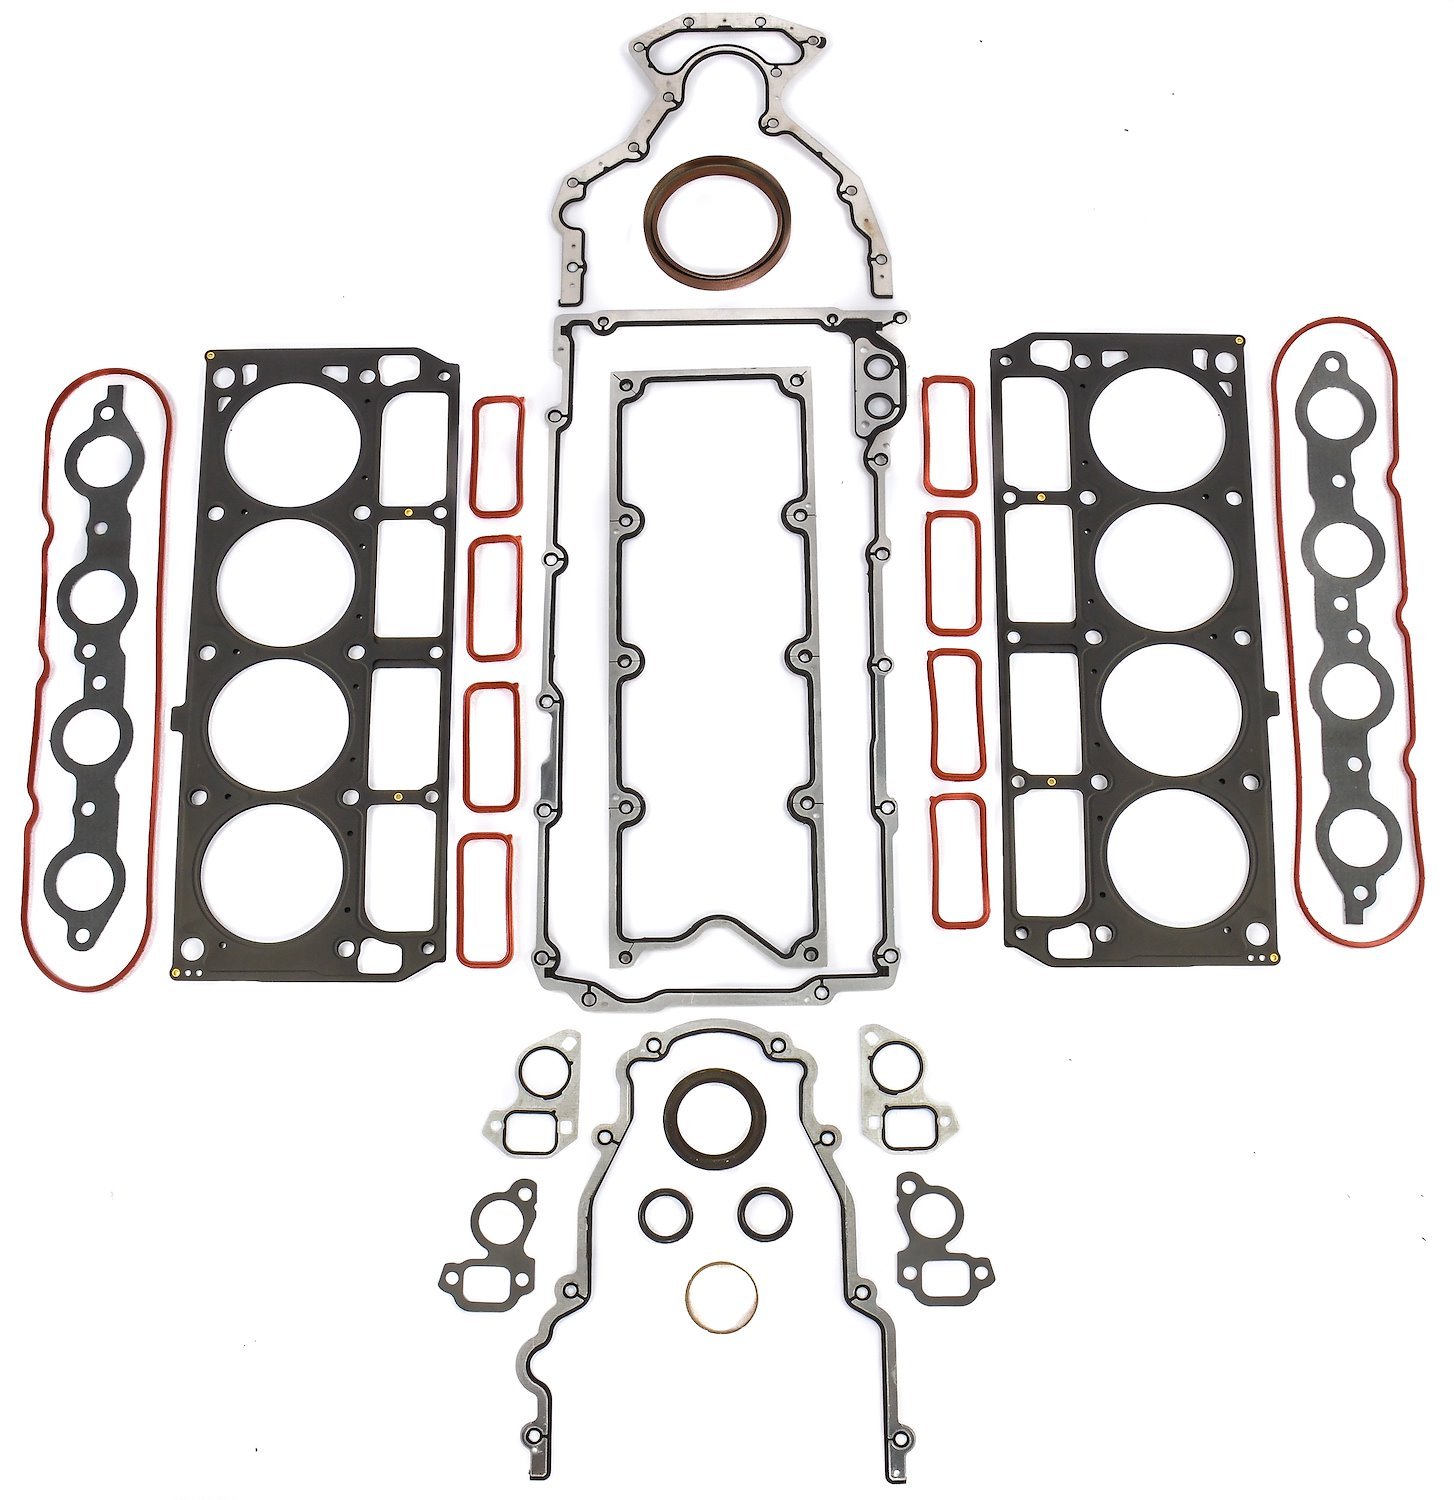 Gasket Kit for GM LS1 LS2 and LS6 Engines